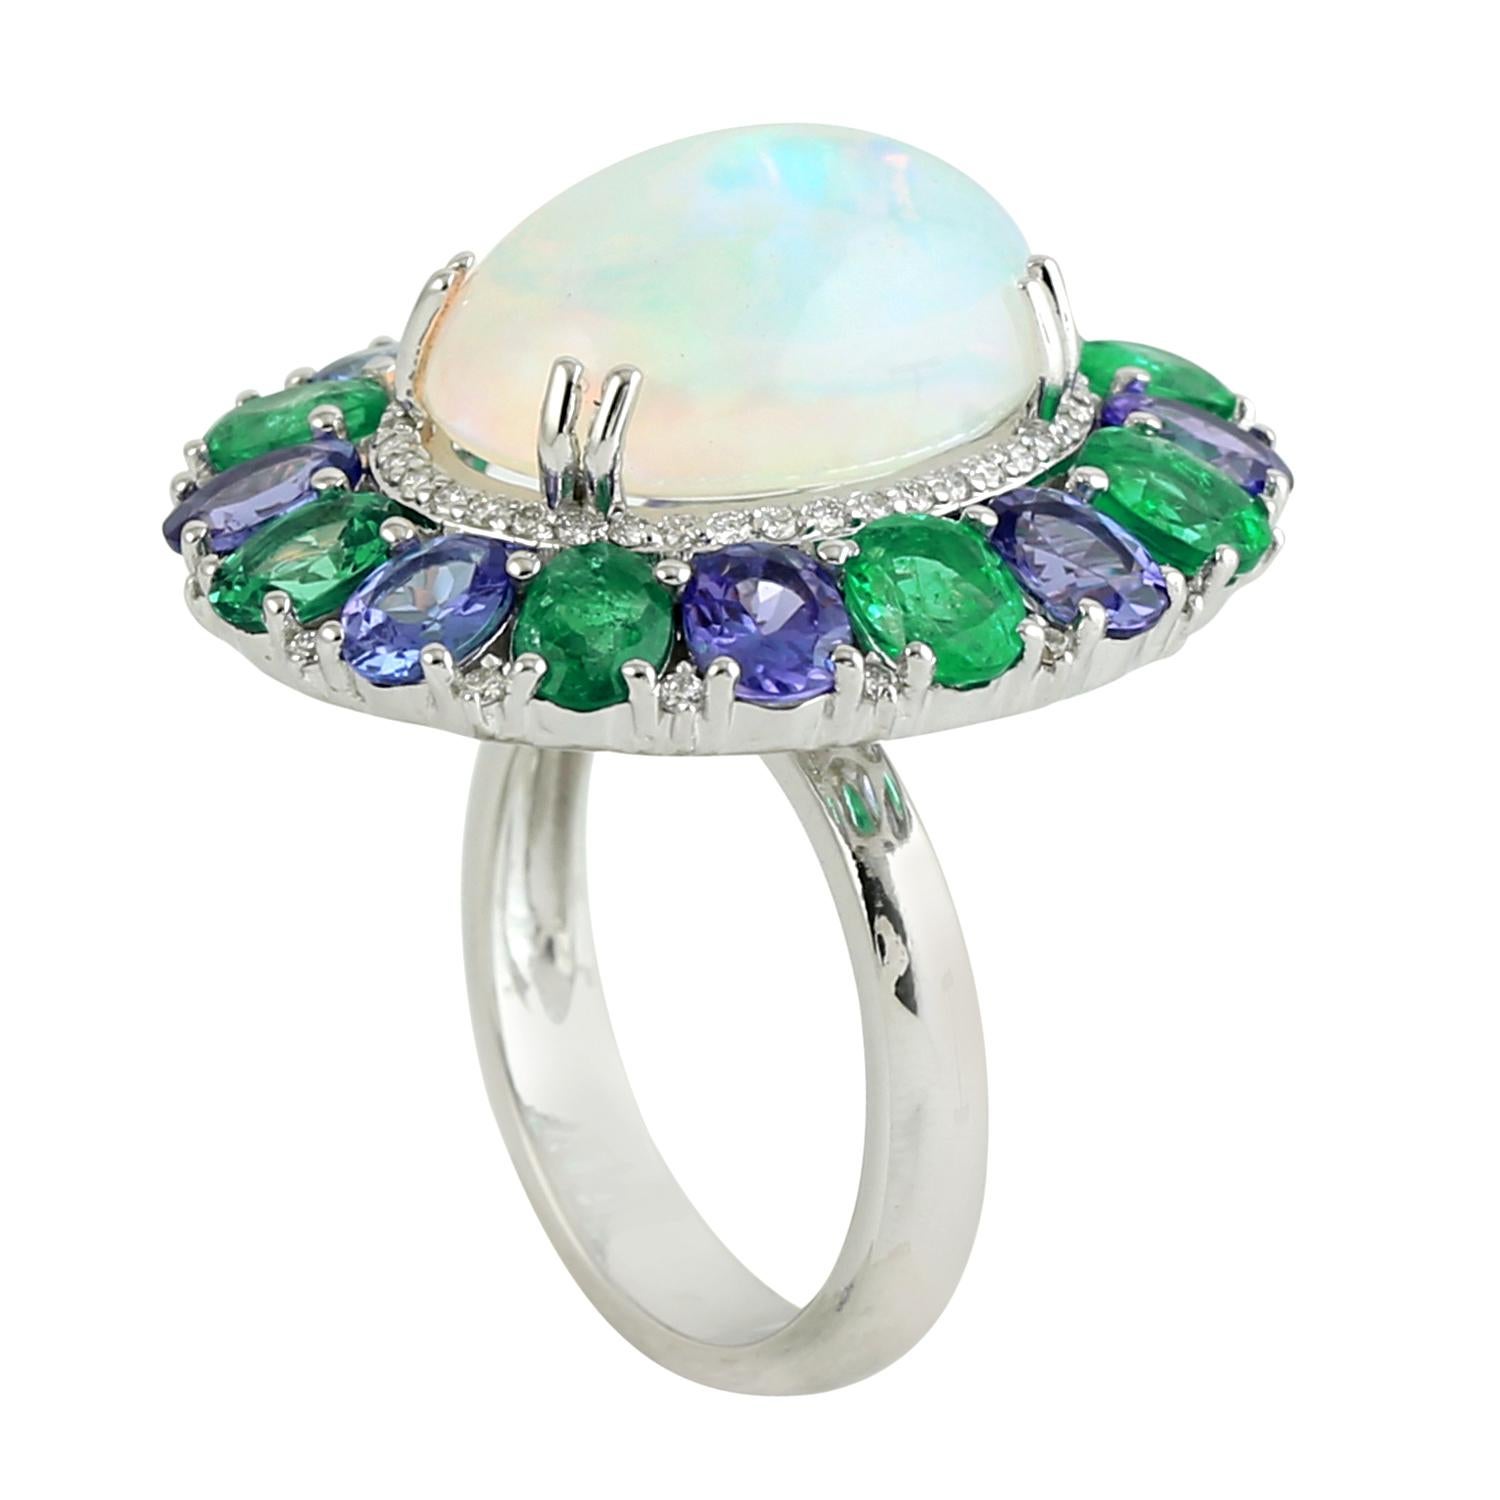 Mixed Cut Opal & Multi Gemstone Ring With Diamonds Made In 18k White Gold For Sale